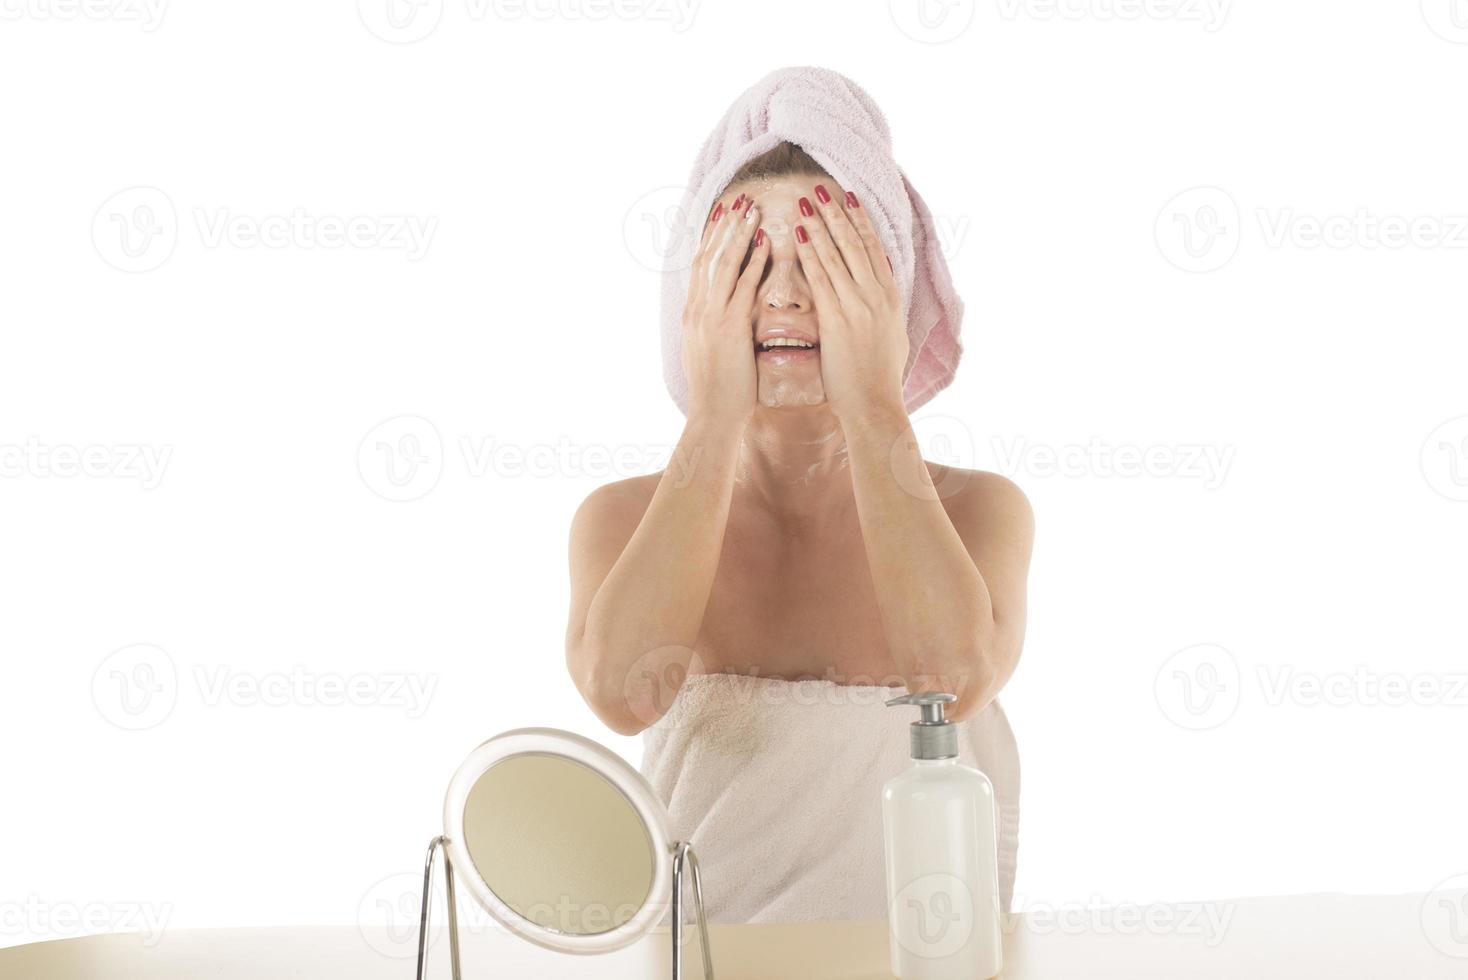 https://static.vecteezy.com/system/resources/previews/016/638/068/non_2x/attractive-young-adult-woman-apply-facial-cream-look-in-mirror-beautiful-healthy-lady-wrapped-in-towels-put-moisturizing-lifting-nourishing-day-creeme-on-soft-hydrated-moisturized-skin-in-bathroom-photo.jpg